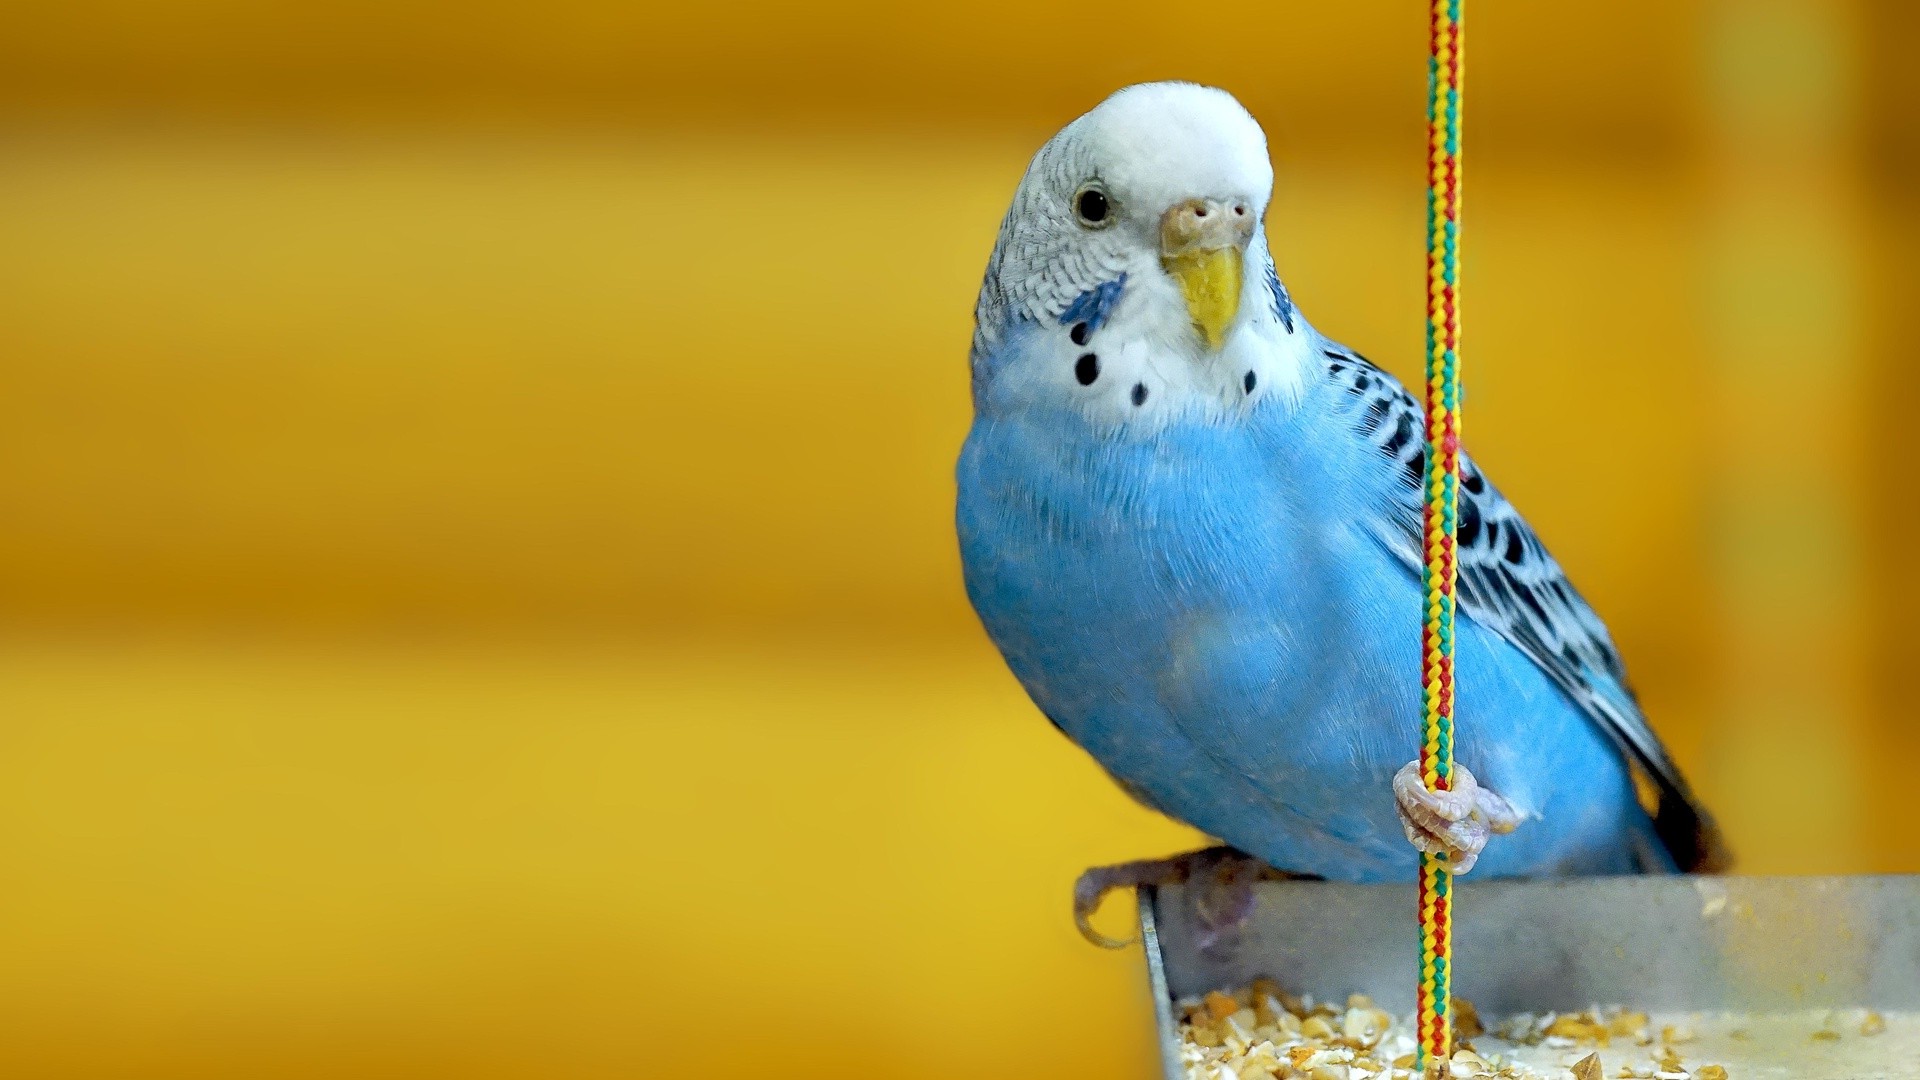 animals Parakeets Birds Yellow Background Wallpapers HD 1920x1080